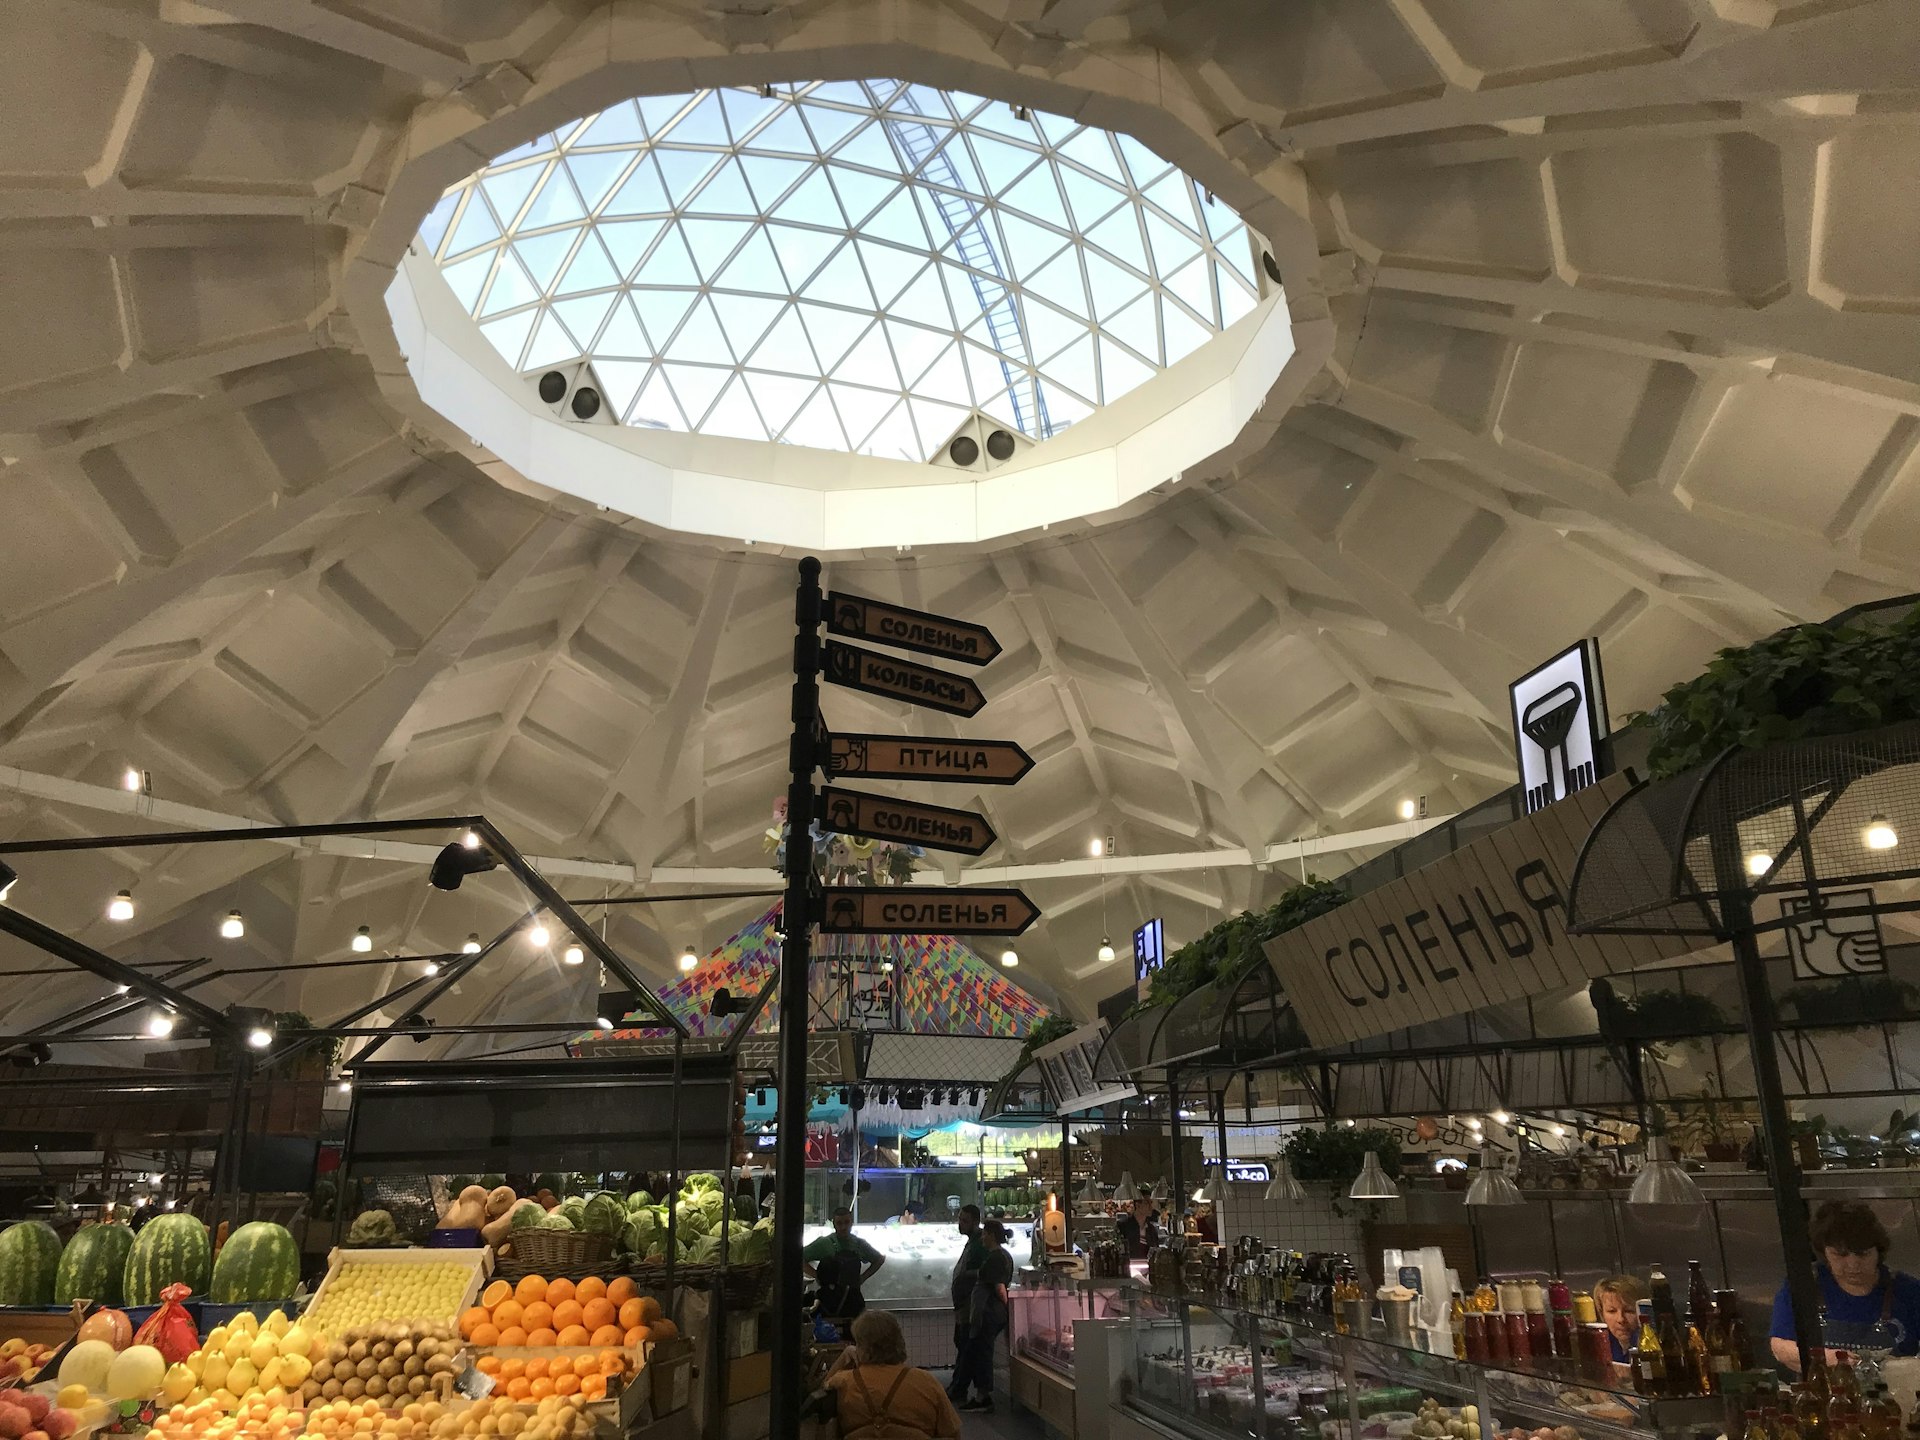 A curved ceiling with a glass domed centre; there is a fruit and veg stall to the left and a row of other market stalls to the right